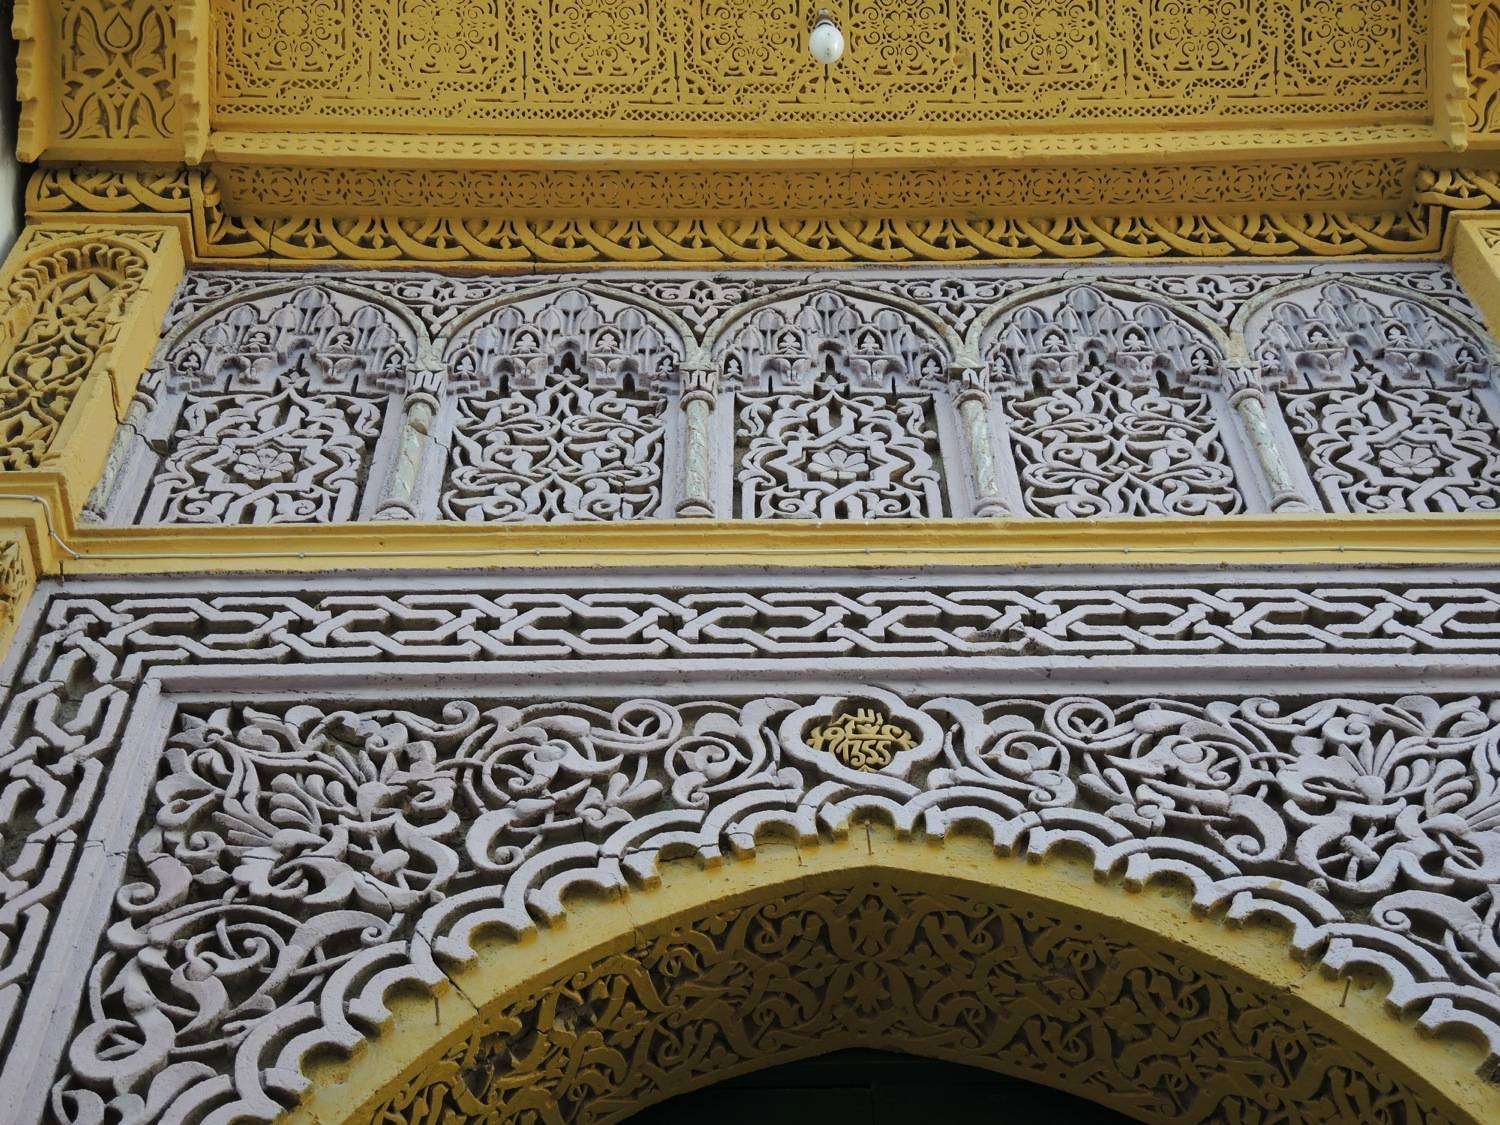 Detail view of the top portion of the main portal